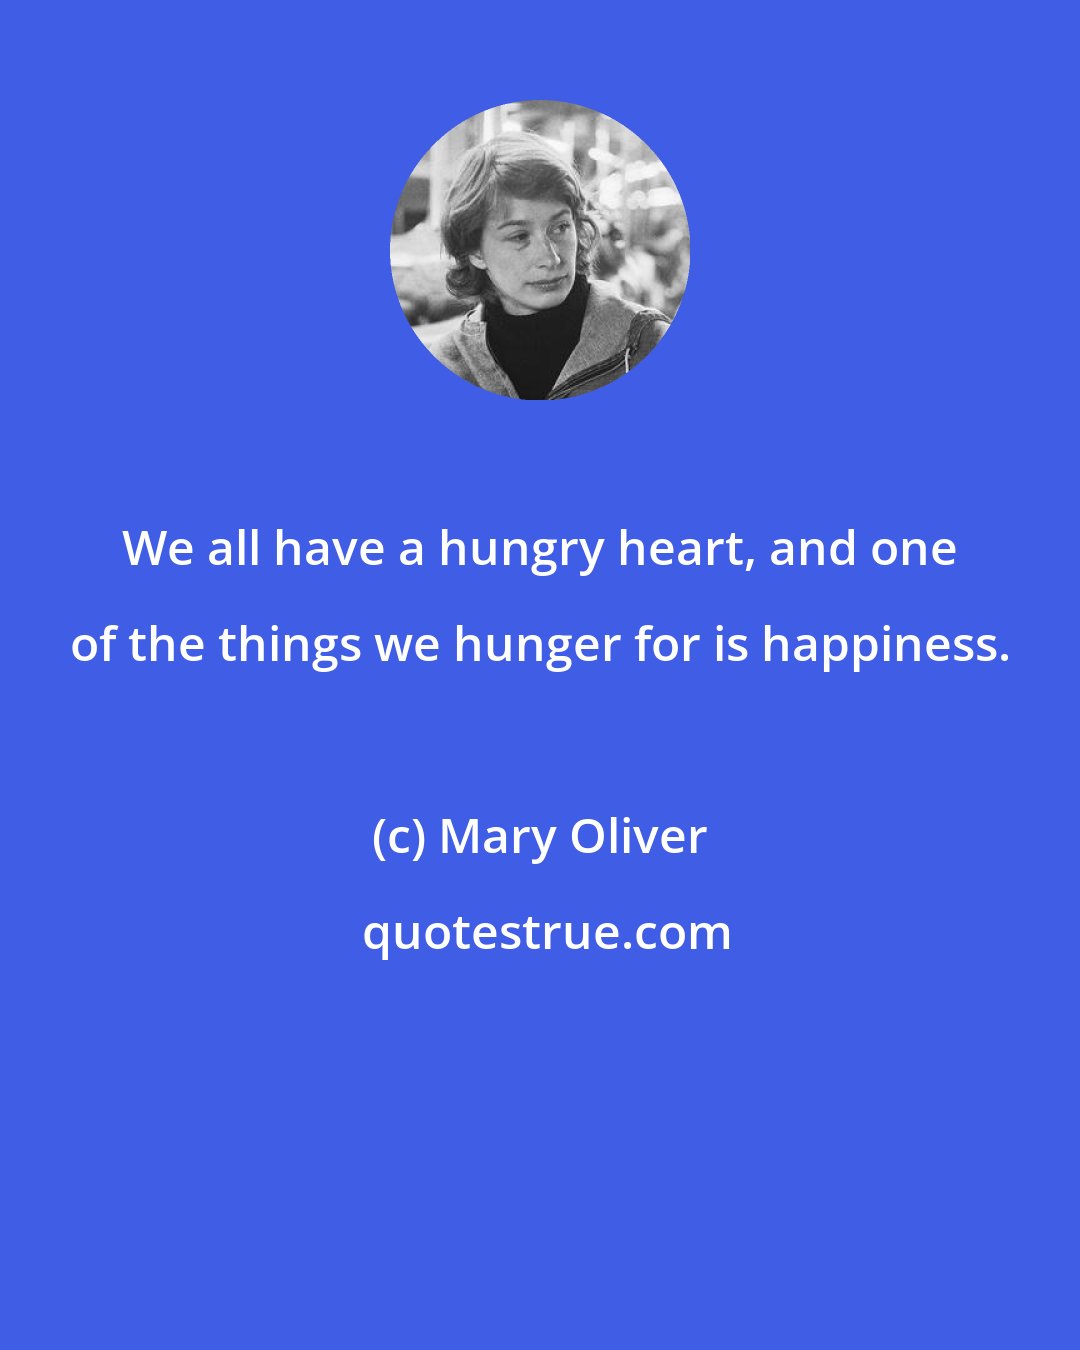 Mary Oliver: We all have a hungry heart, and one of the things we hunger for is happiness.